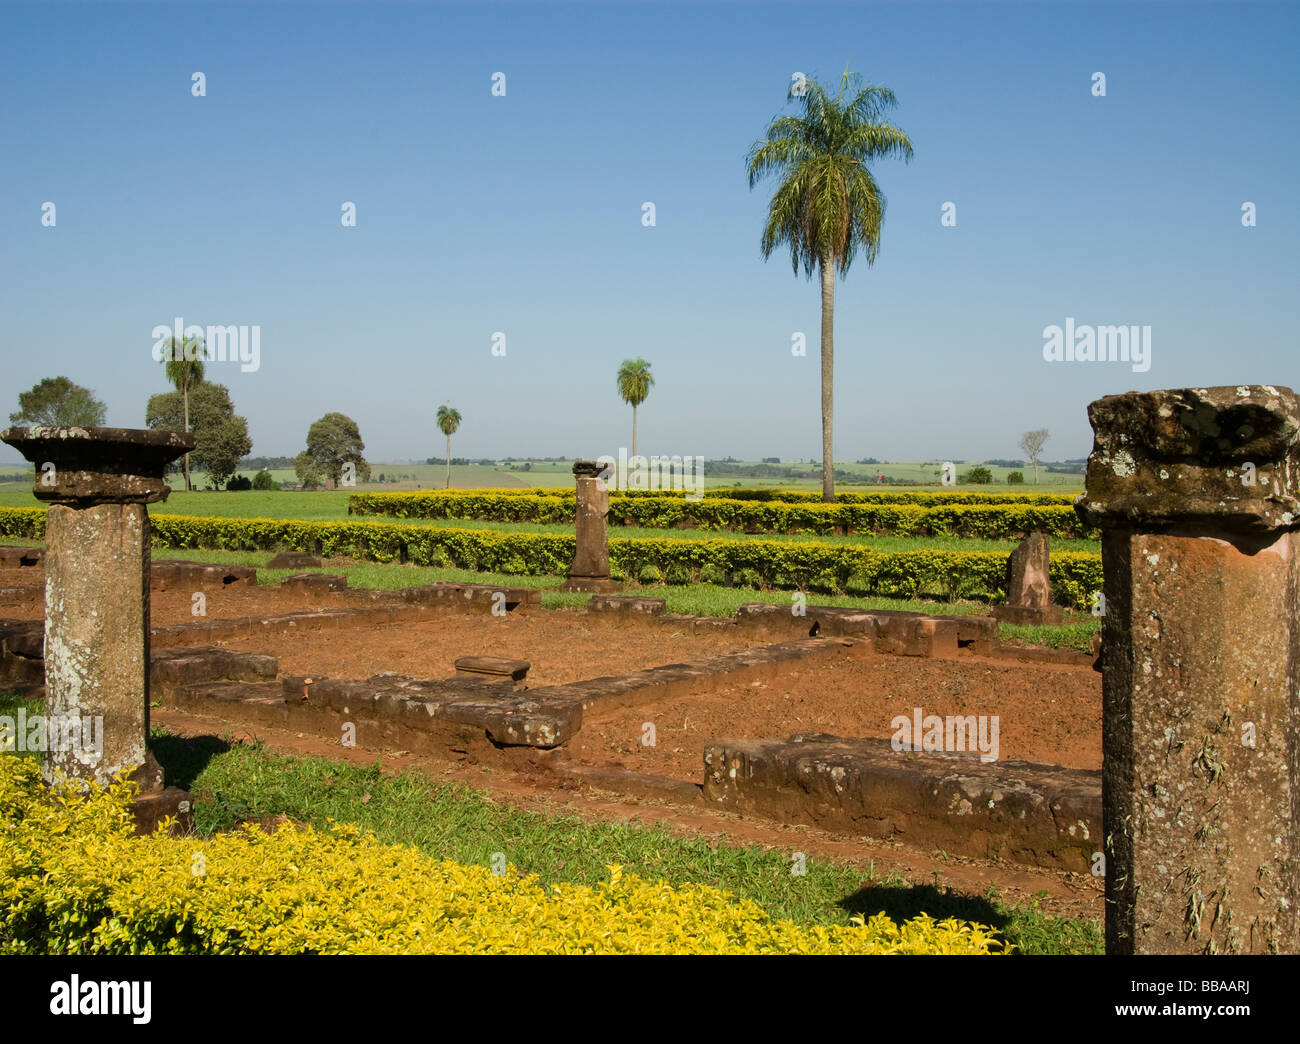 Paraguay.Jesuits Reductions.Reduction of Jésus.Home of indians.UNESCO World Heritage Site. Stock Photo